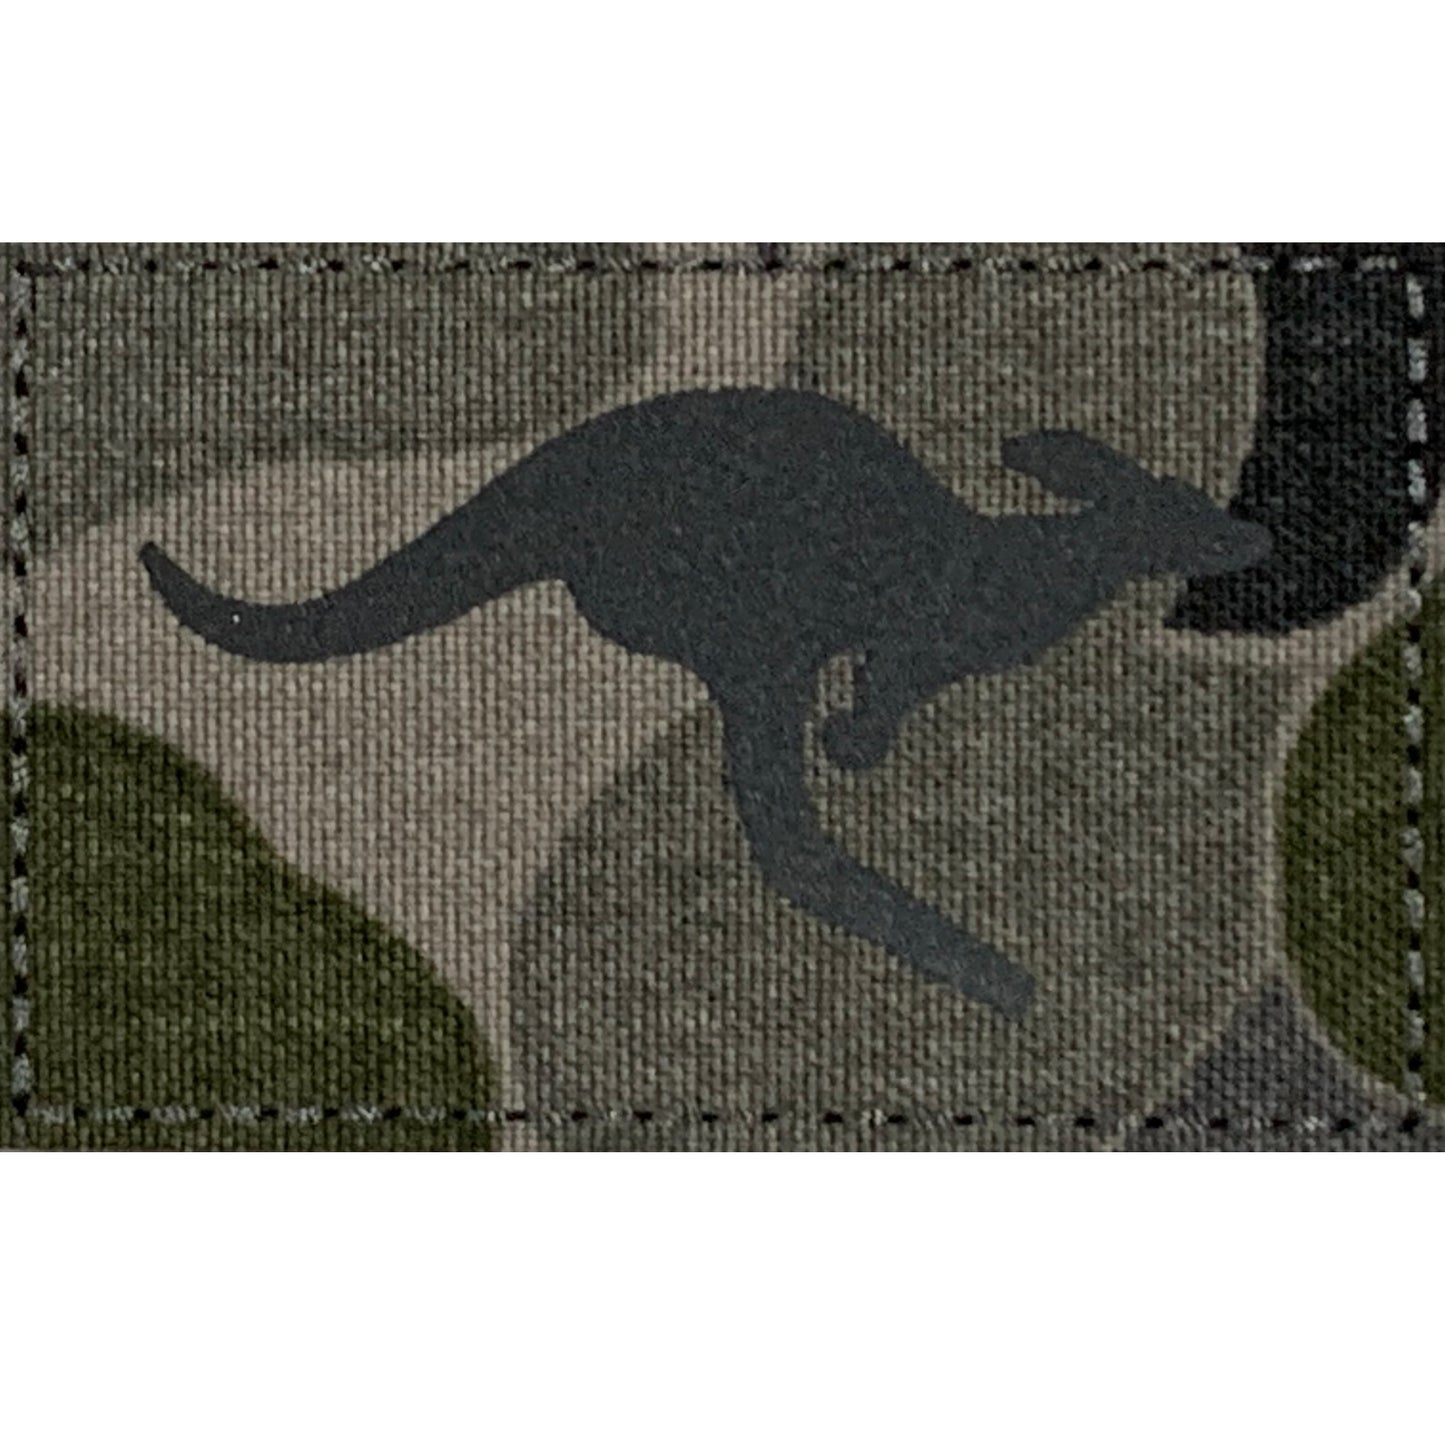  Australian Army Kangaroo Patch Recon Reflective IR  Velcro Backed  Size: 8cm x 5cm  Hook and Loop included